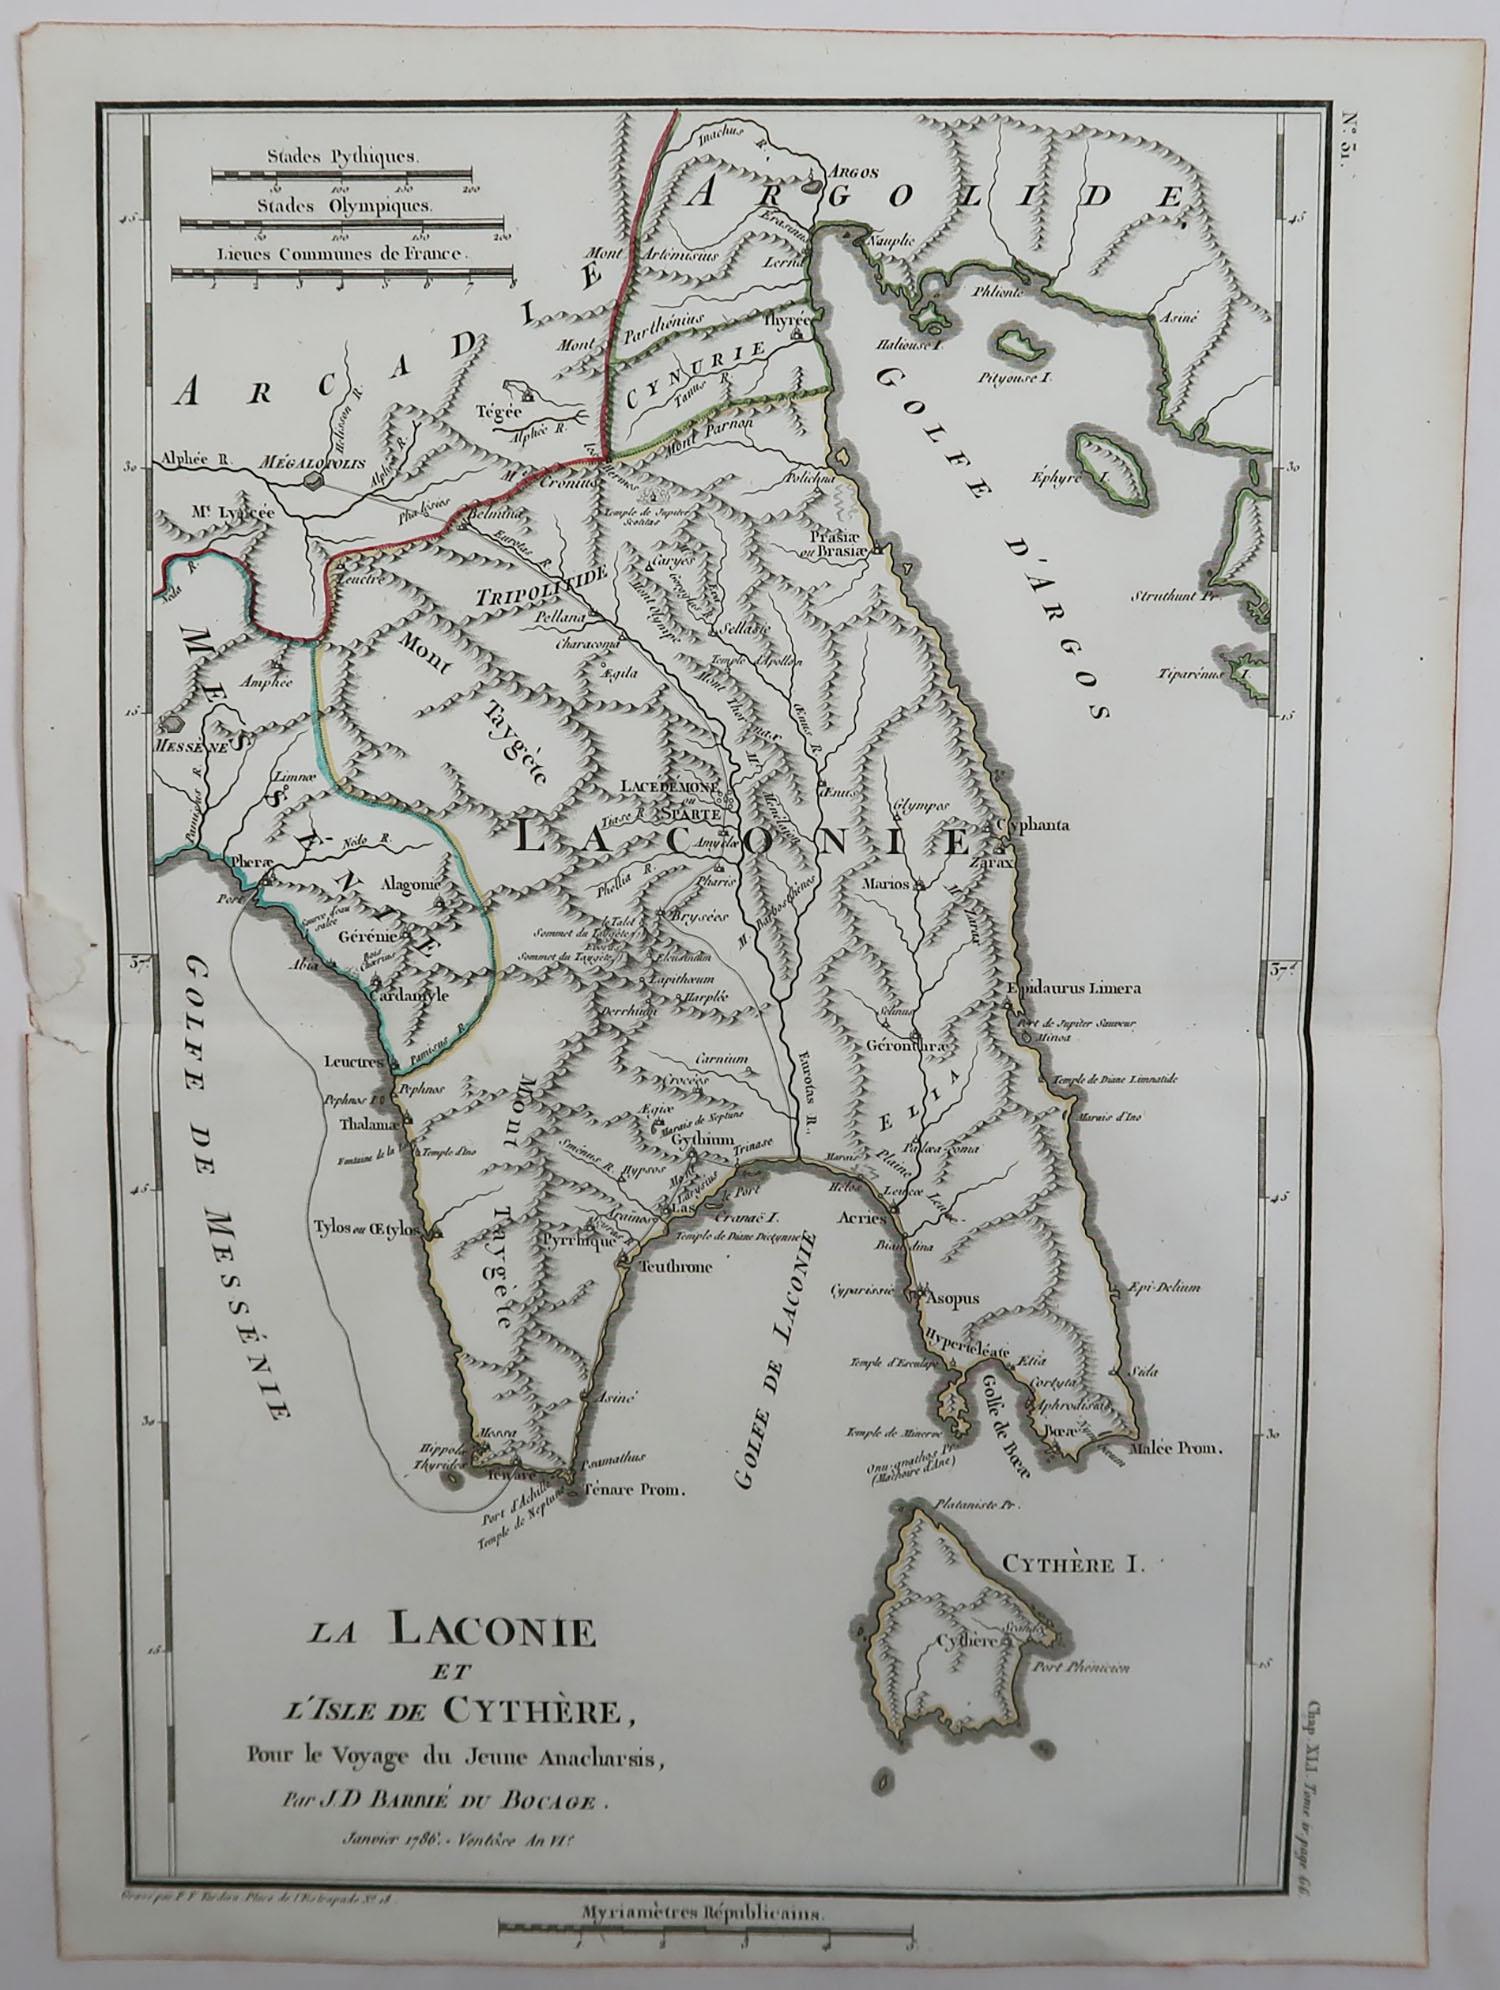 Other Original Antique Map of Ancient Greece, Laconia, Island of Cythera, 1786